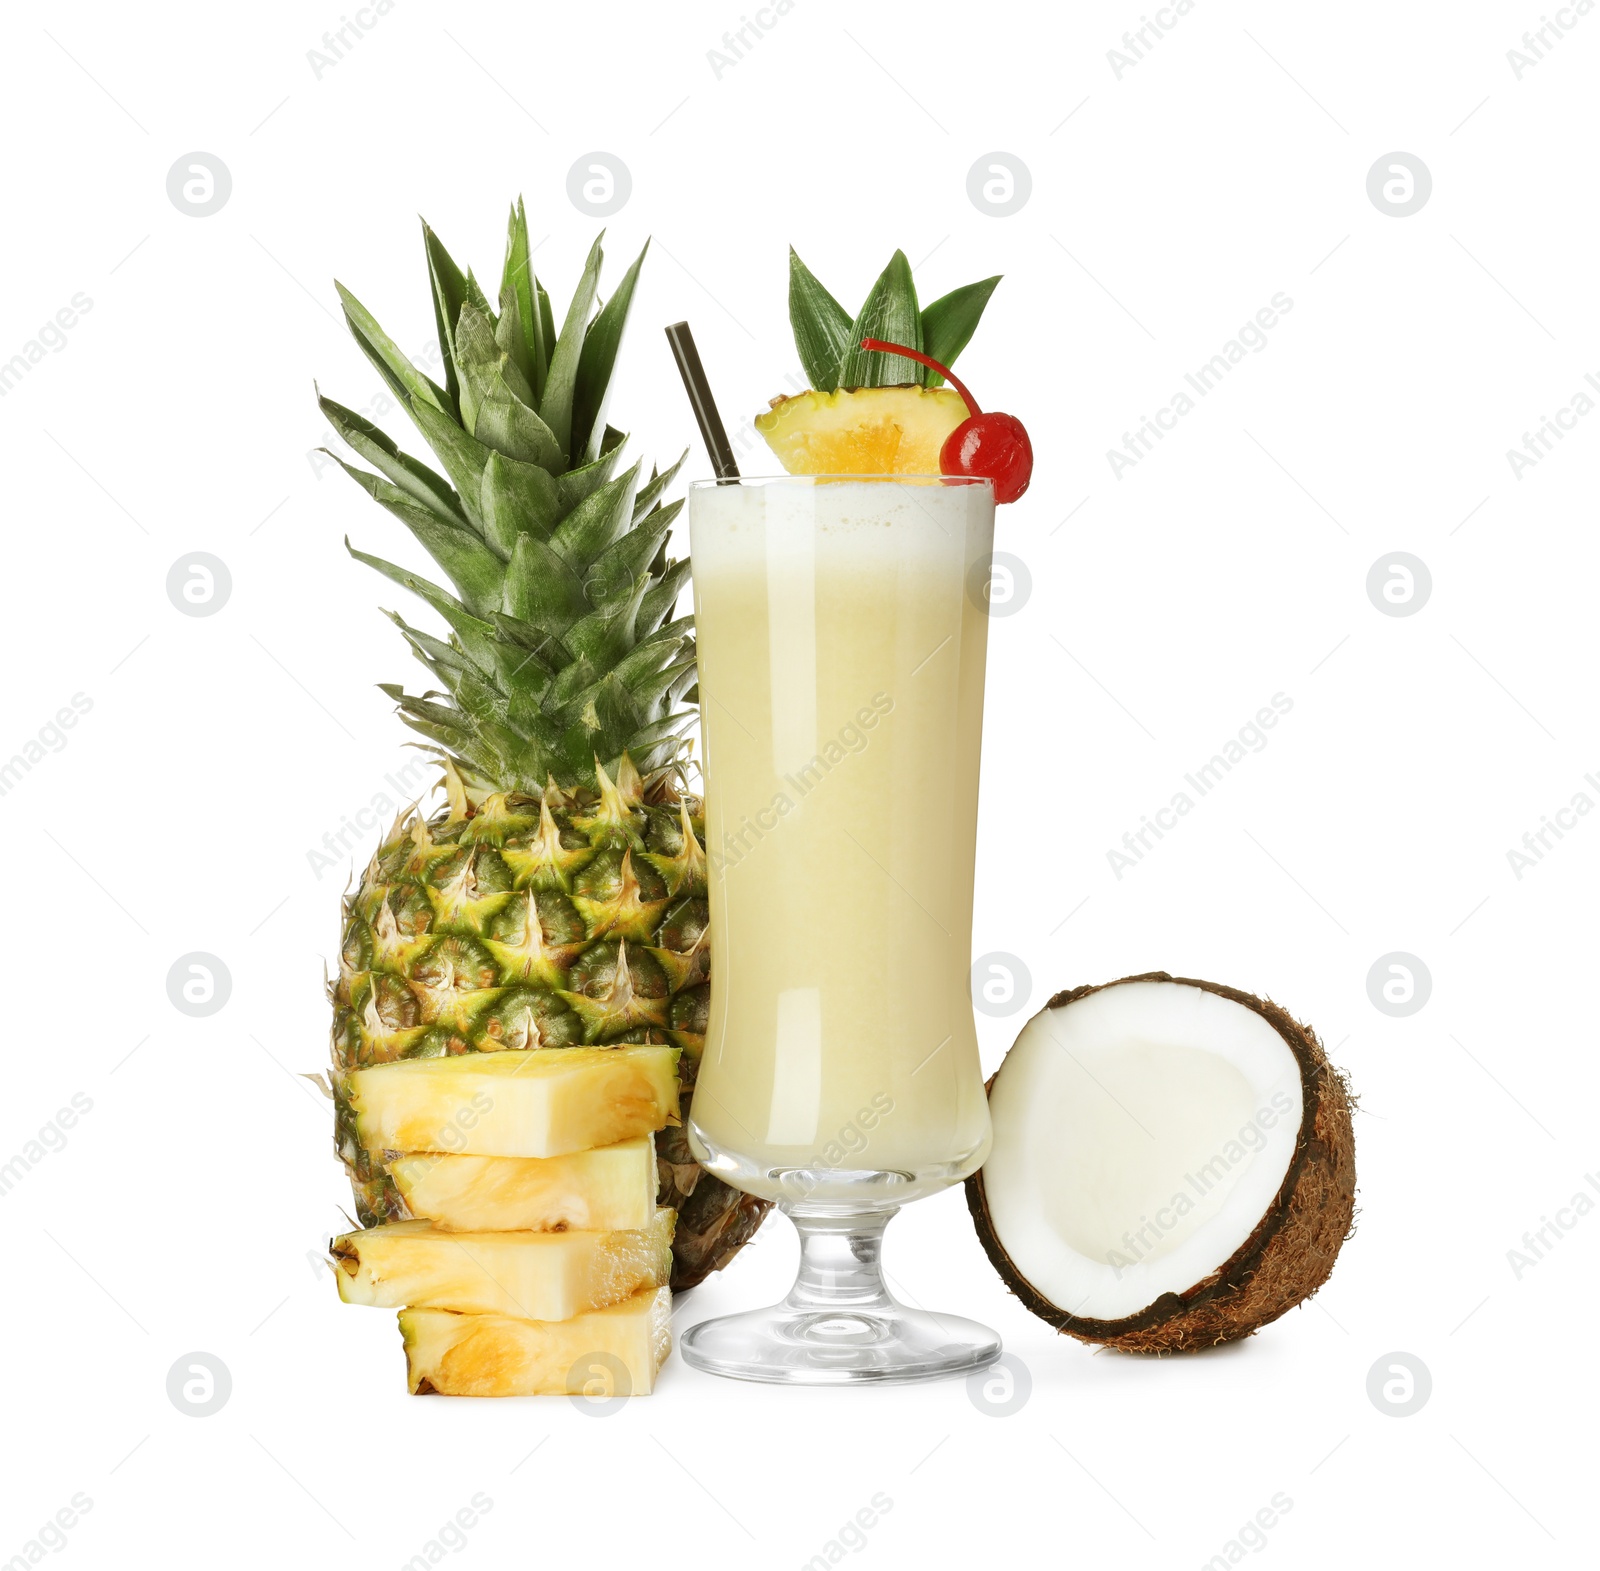 Photo of Tasty Pina Colada cocktail and ingredients on white background